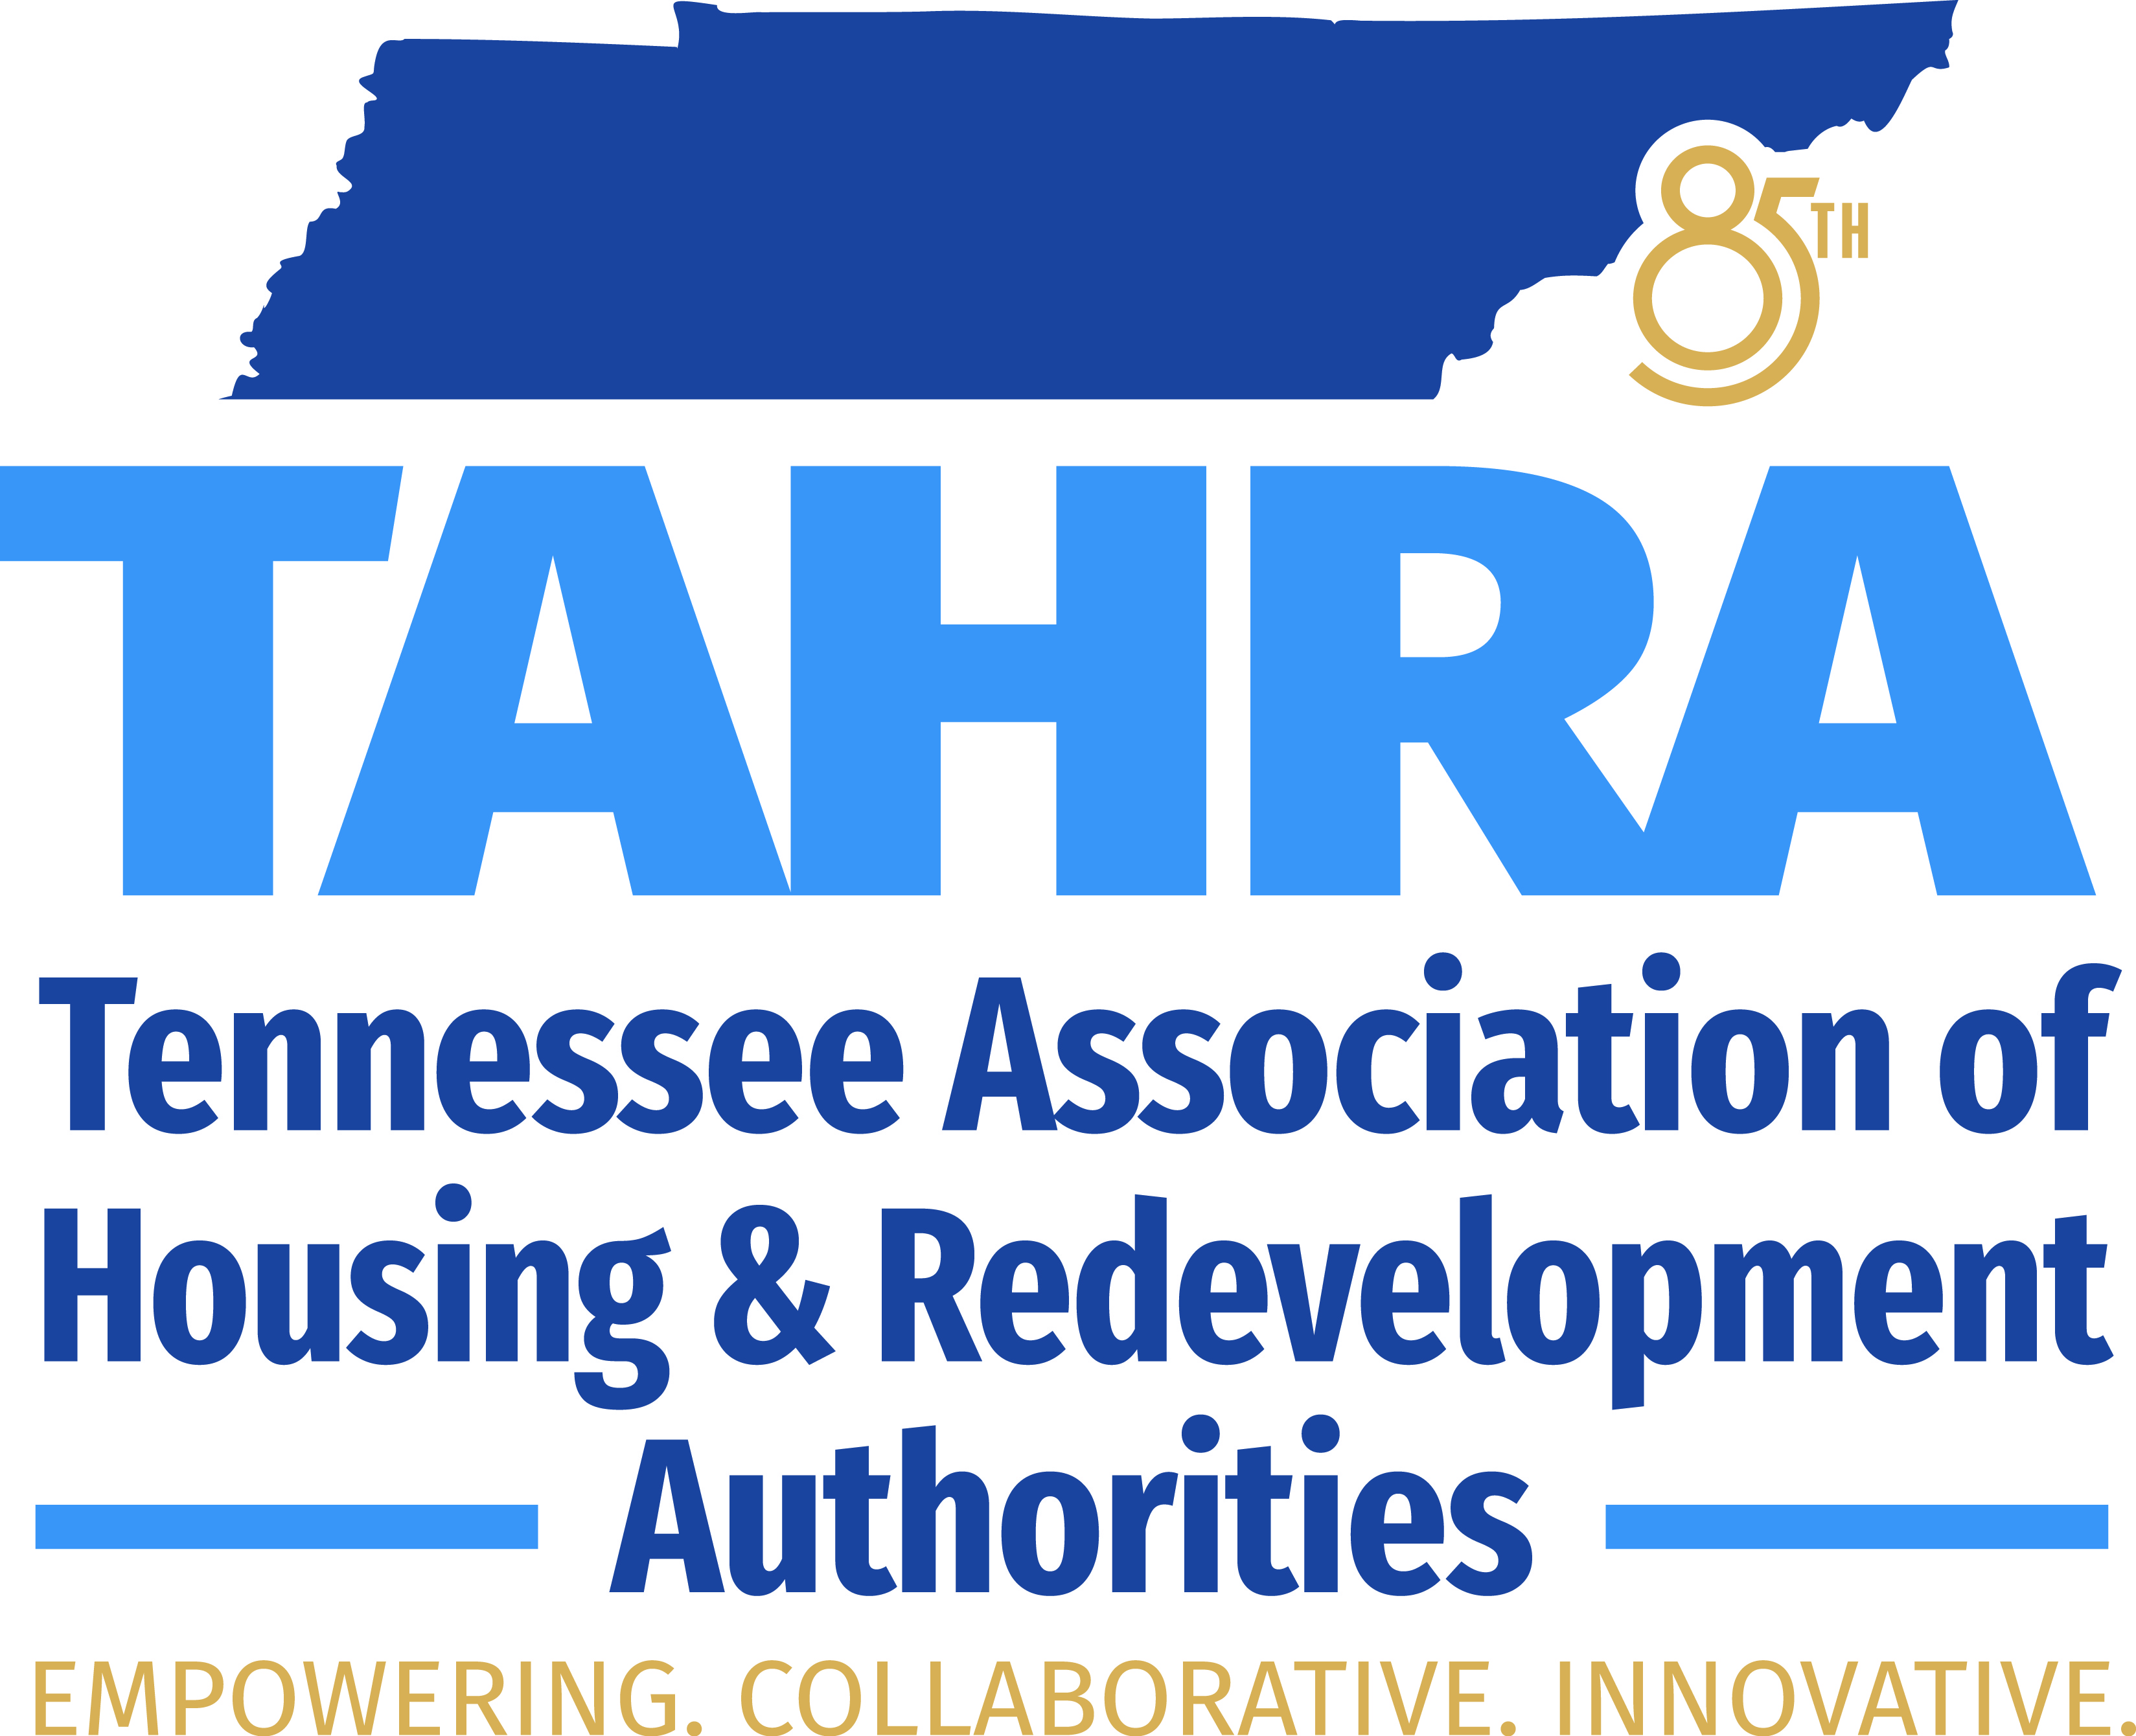 Tennessee Association of Housing and Redevelopment Authorities